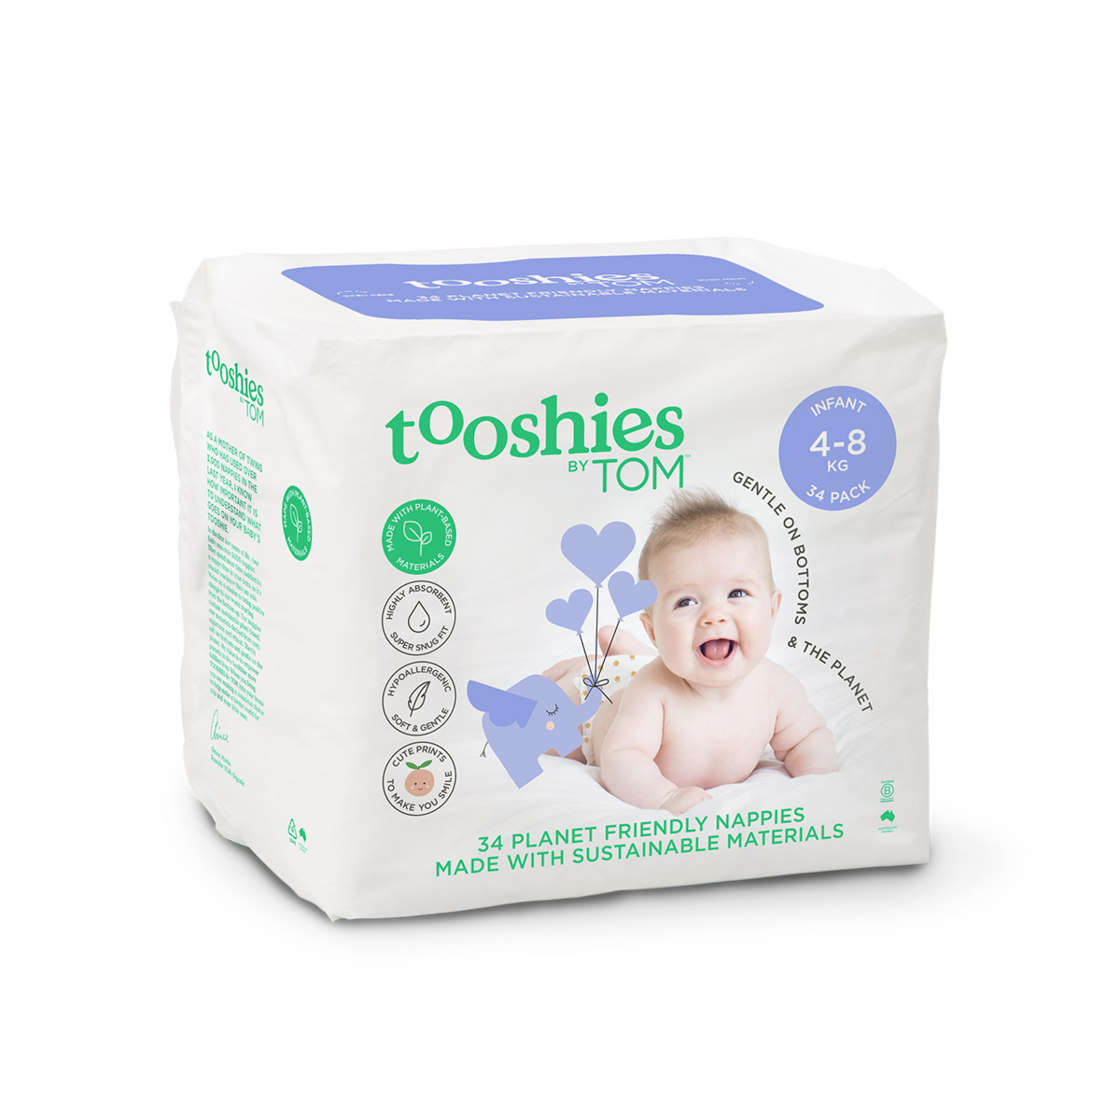 Eco Nappies – Infant 4-8 kg, 34 pcs by Tooshies by TOM